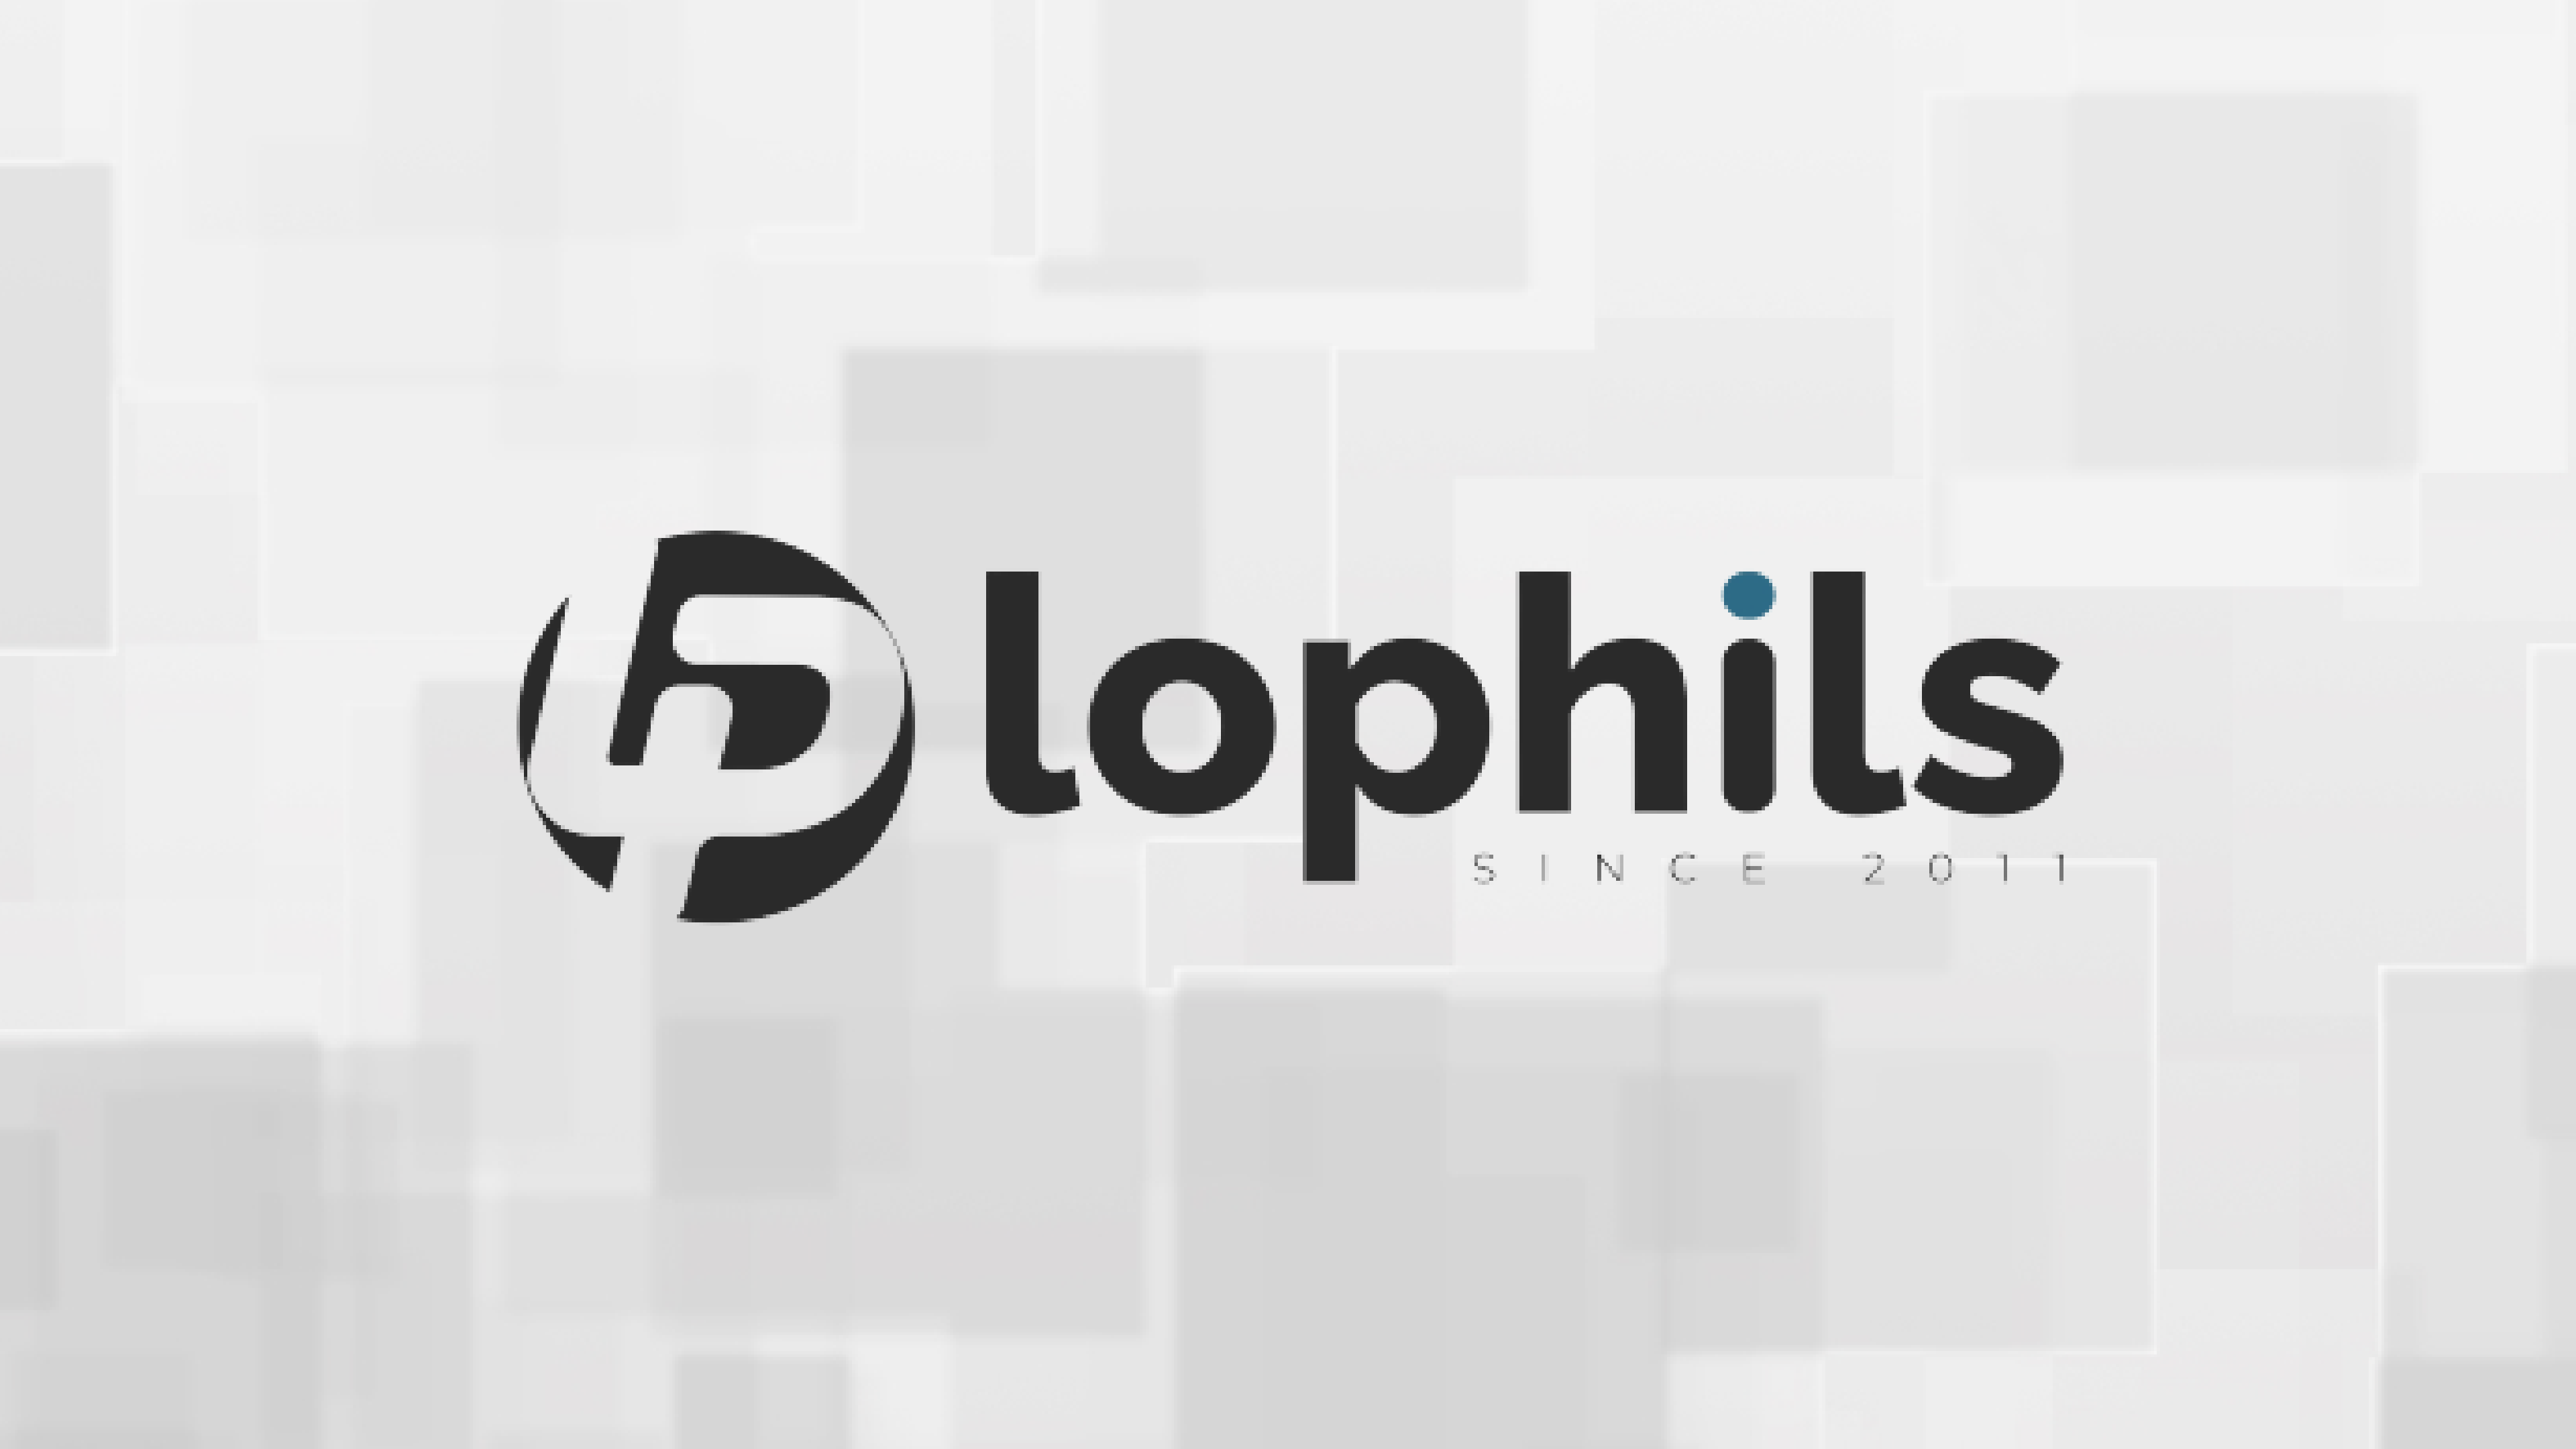 LOPhils Reduces Deployment Time to 15 mins with Serverless Services on AWS